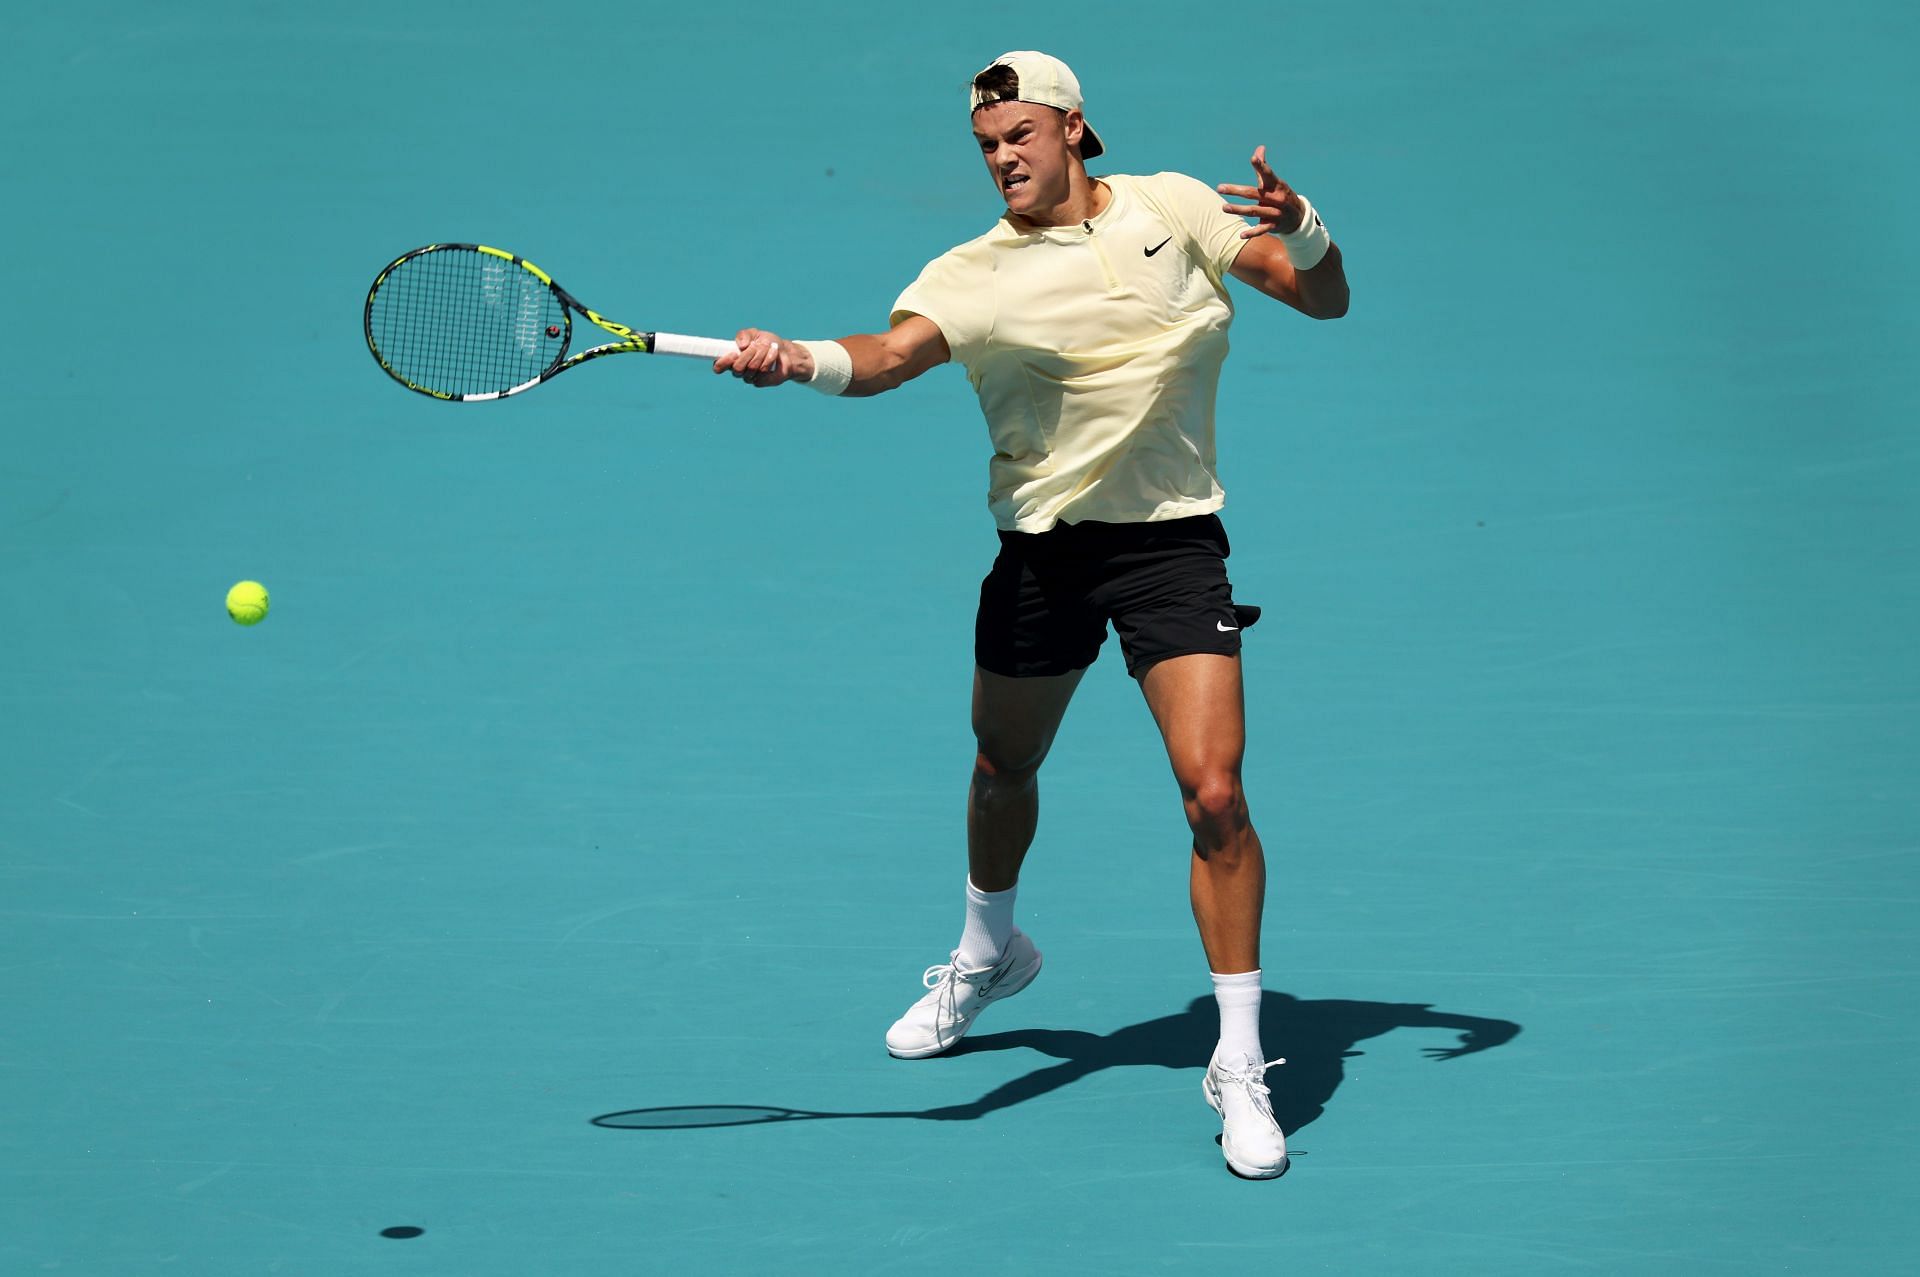 Monte-Carlo 2023 Dominic Thiem vs Holger Rune preview, head-to-head, prediction, odds and pick